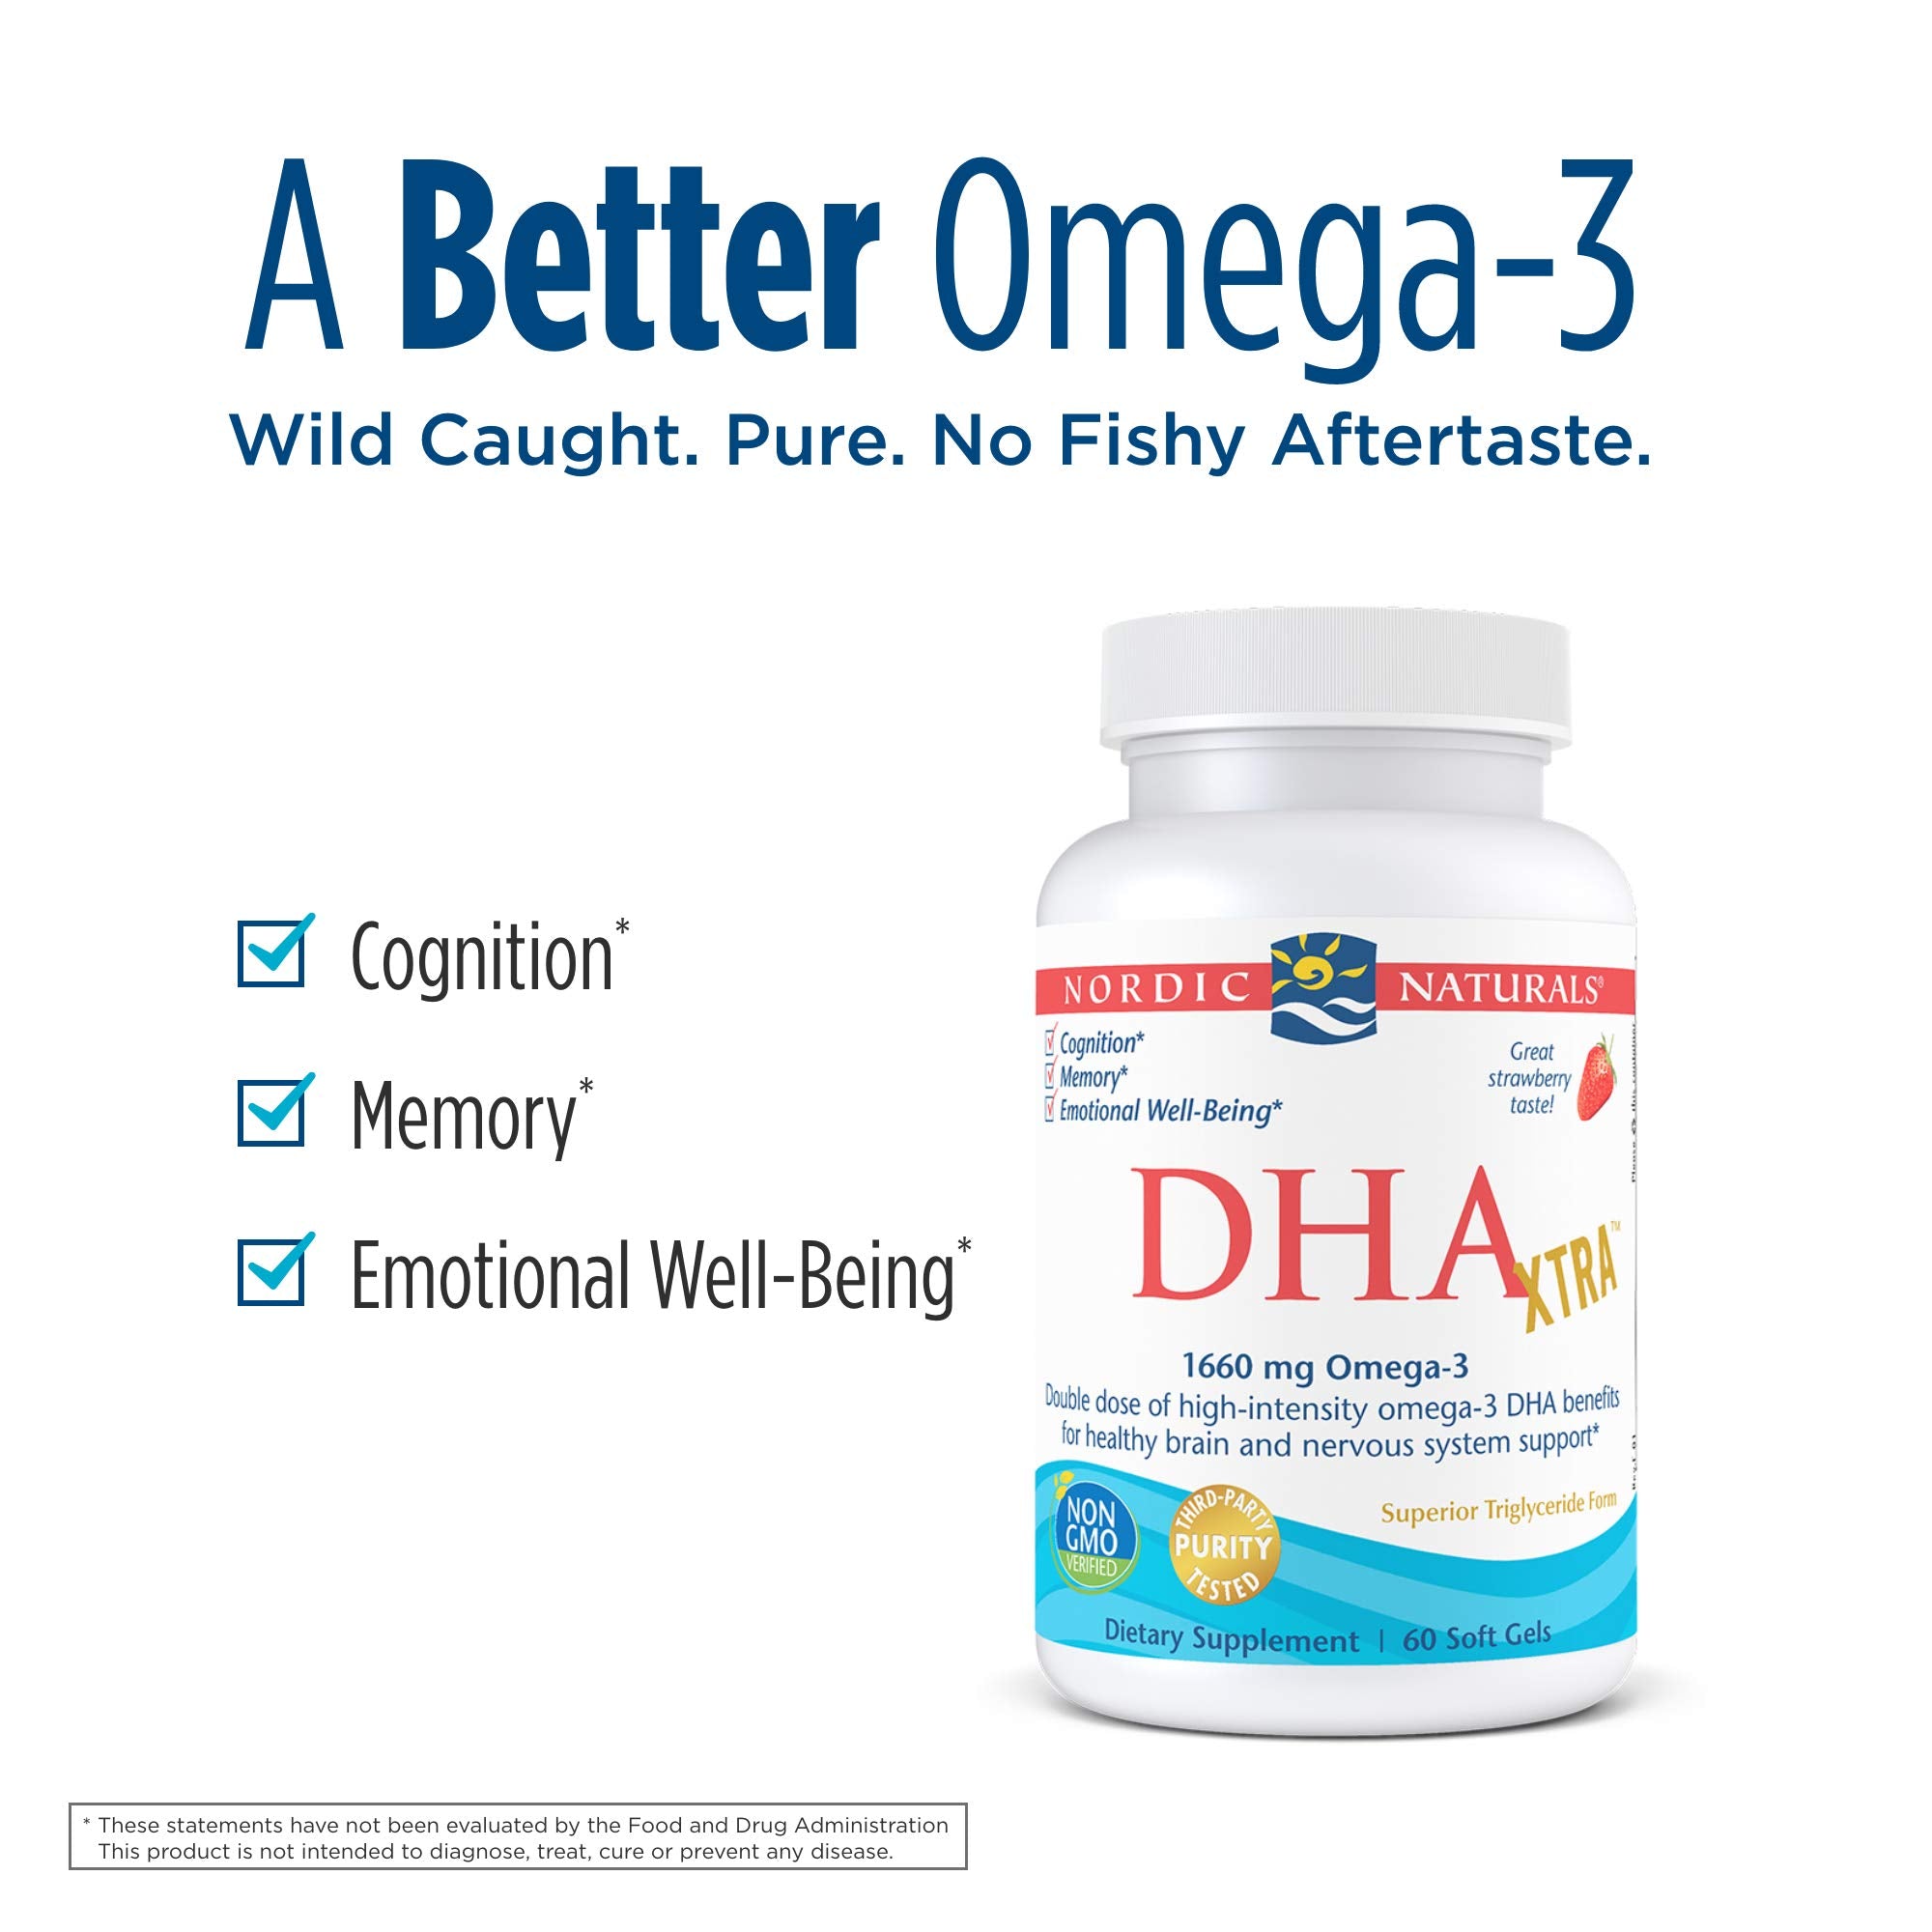 Nordic Naturals DHA Xtra, Strawberry - 90 Soft Gels - 1660 mg Omega-3 - High-Intensity DHA Formula for Brain & Nervous System Support - Non-GMO - 45 Servings